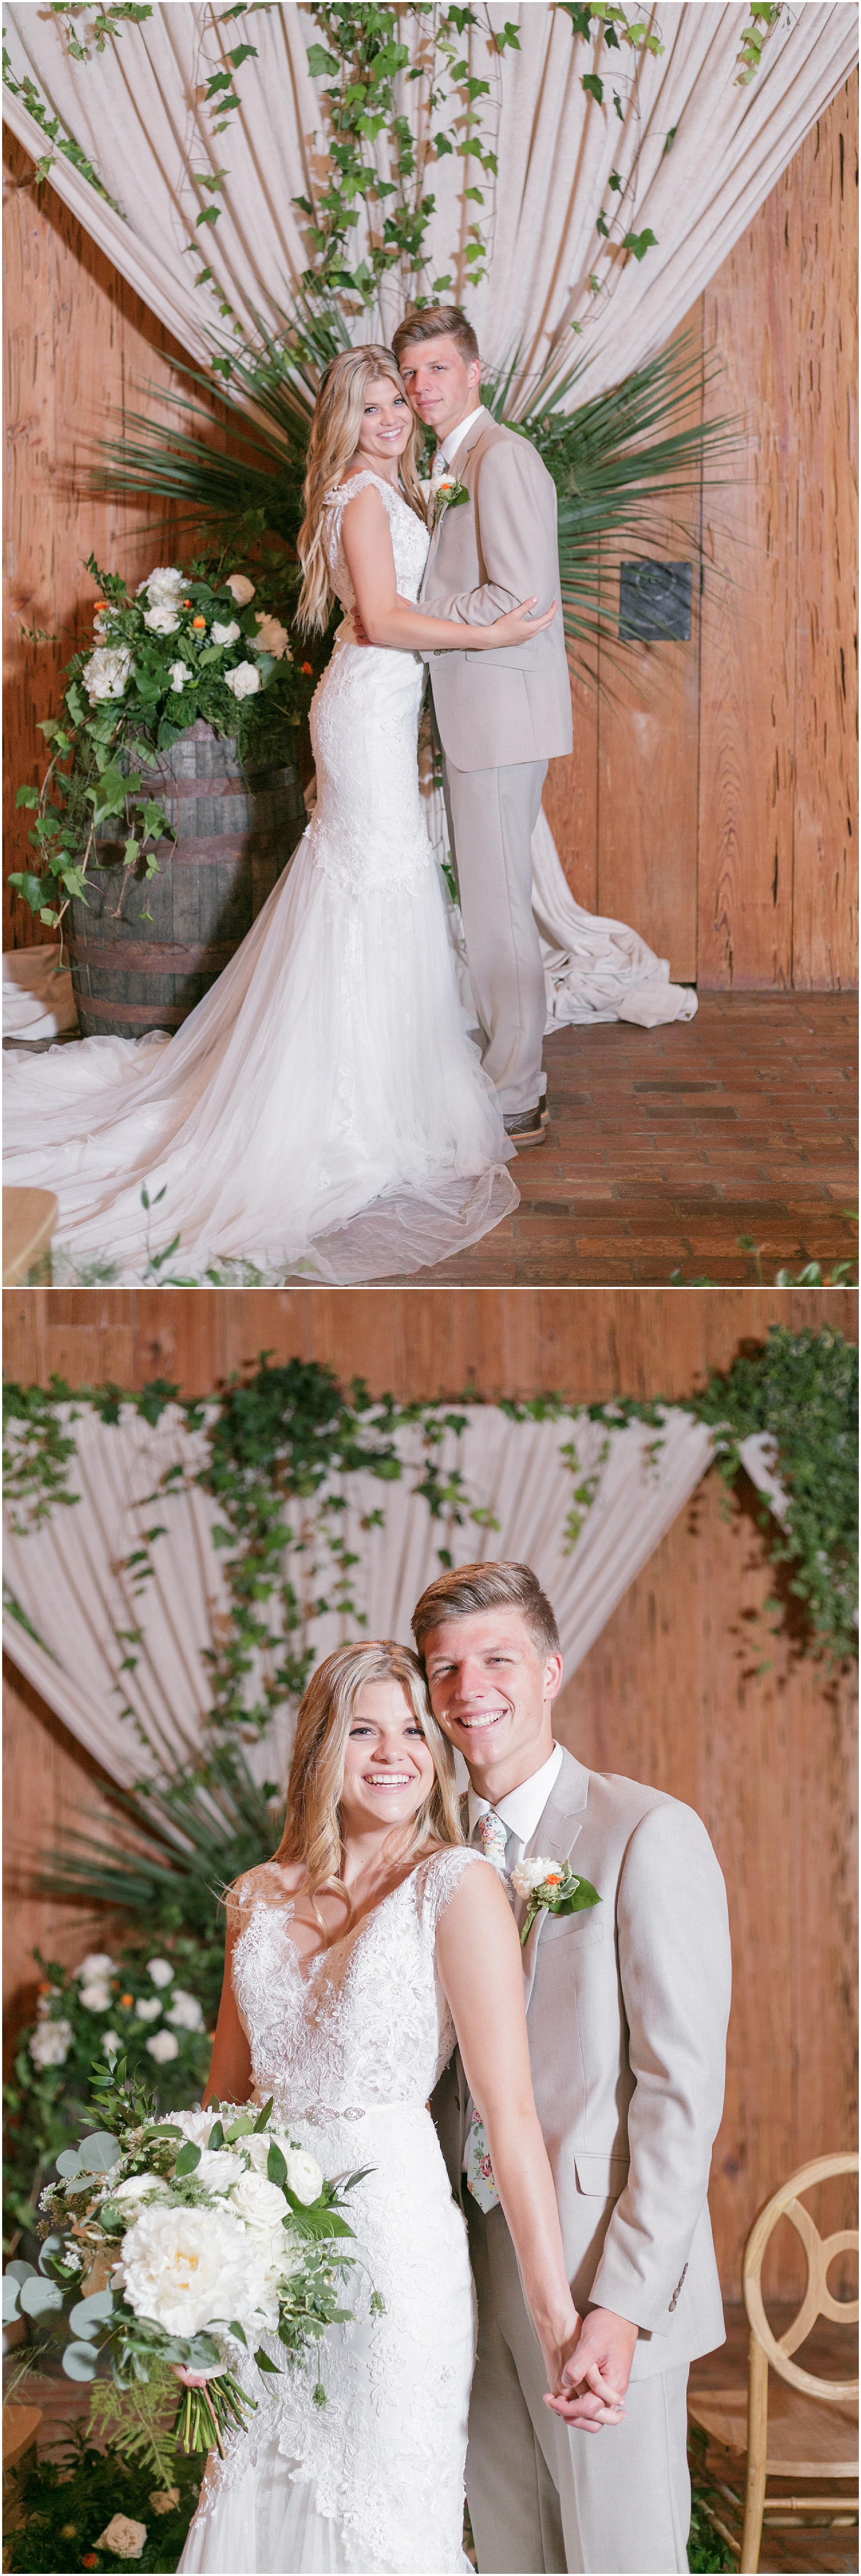 Portraits of the bride and groom together at the alter in the indoor ceremony space. 